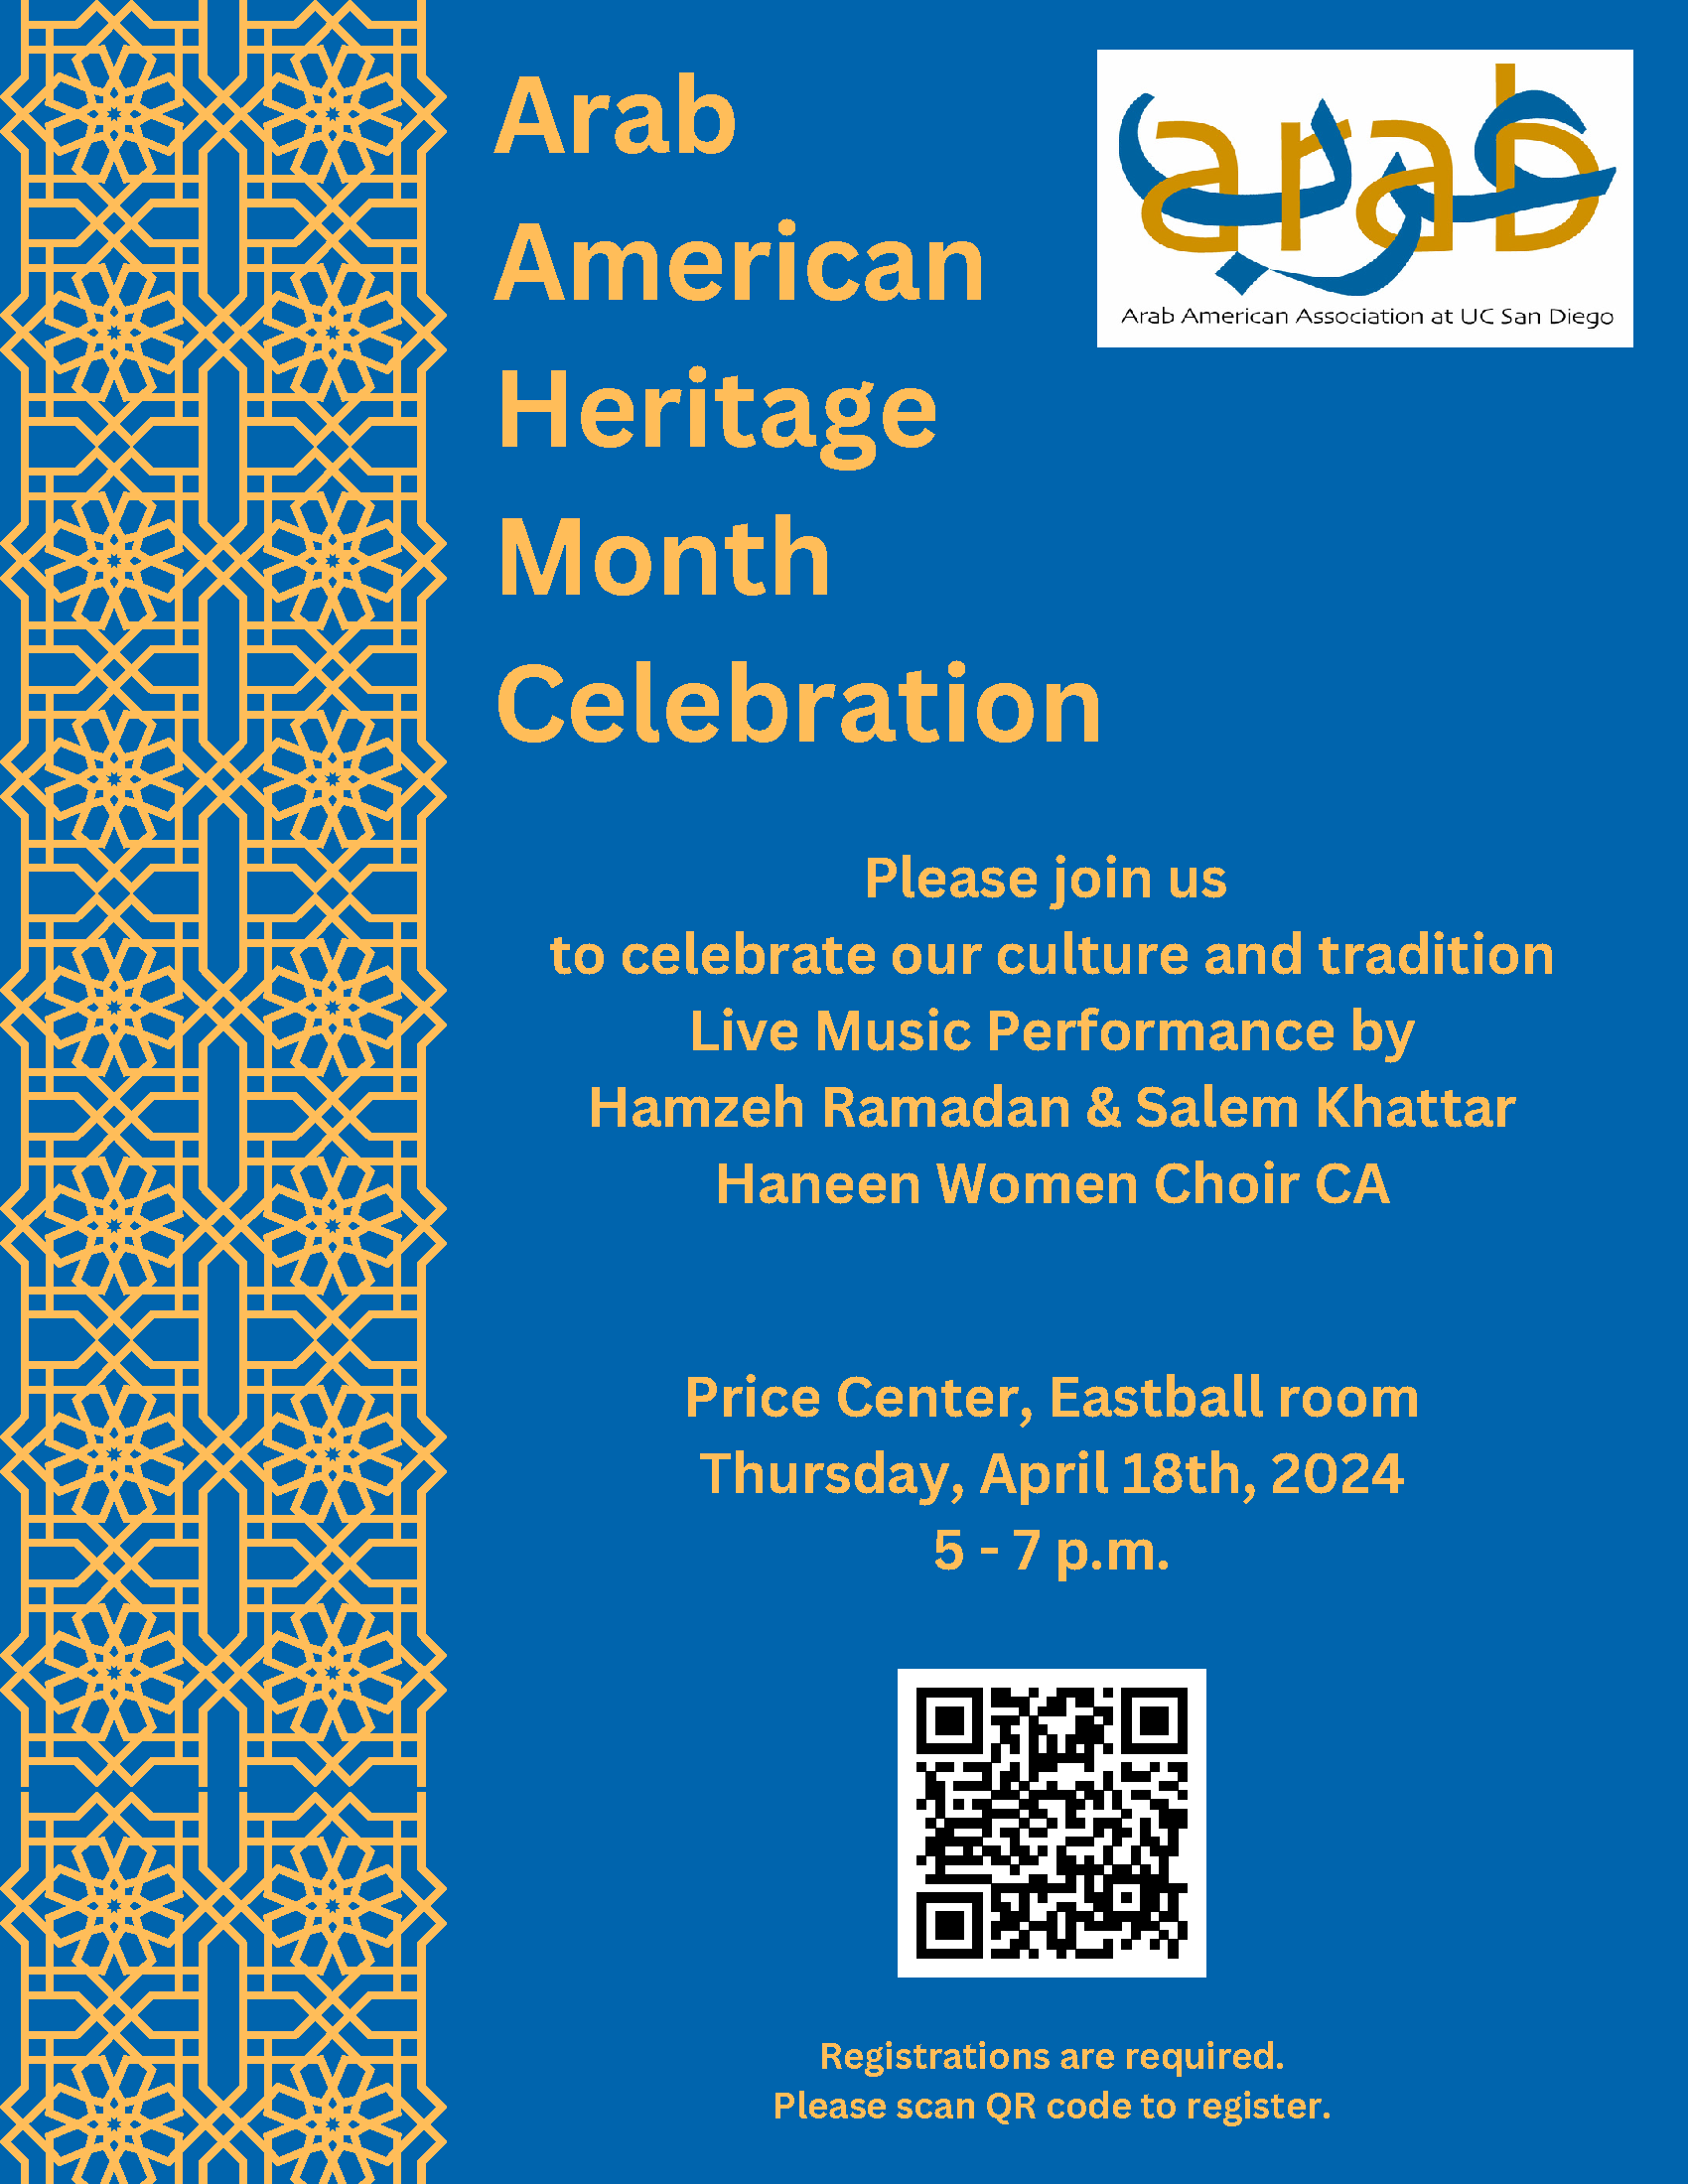 Arab American Heritage Month at UCSD